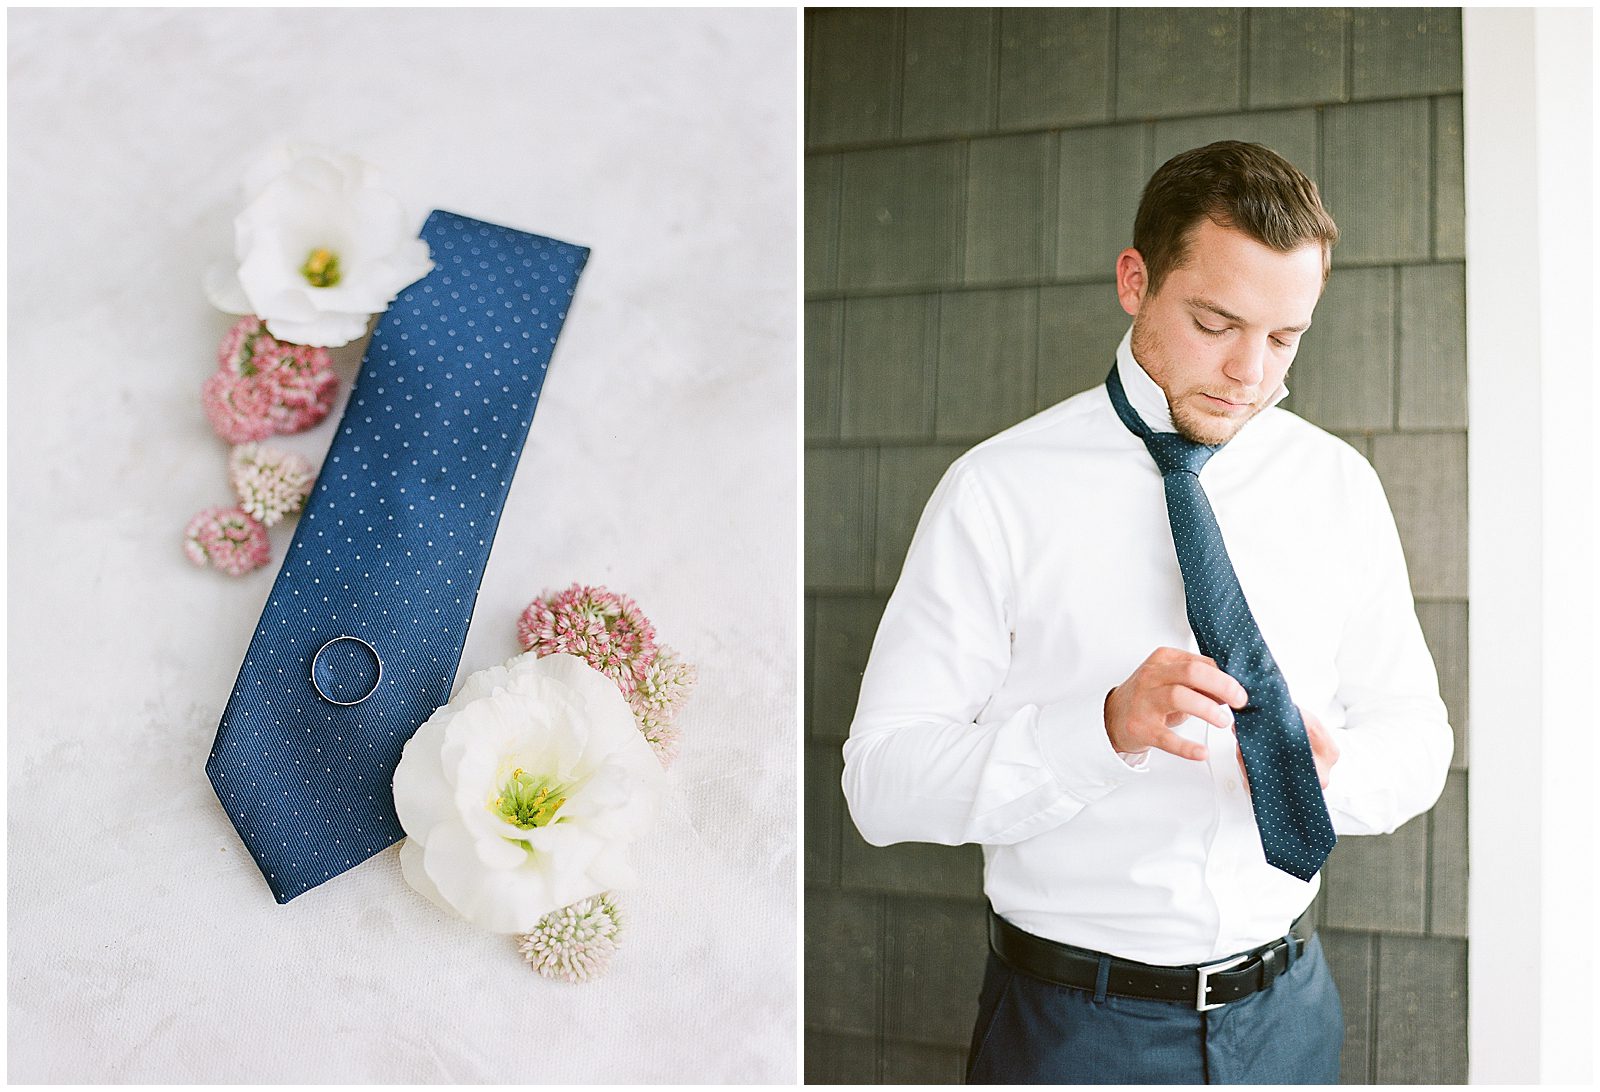 Grooms Details Tie Ring and Flowers And Groom Putting Tie On Photos